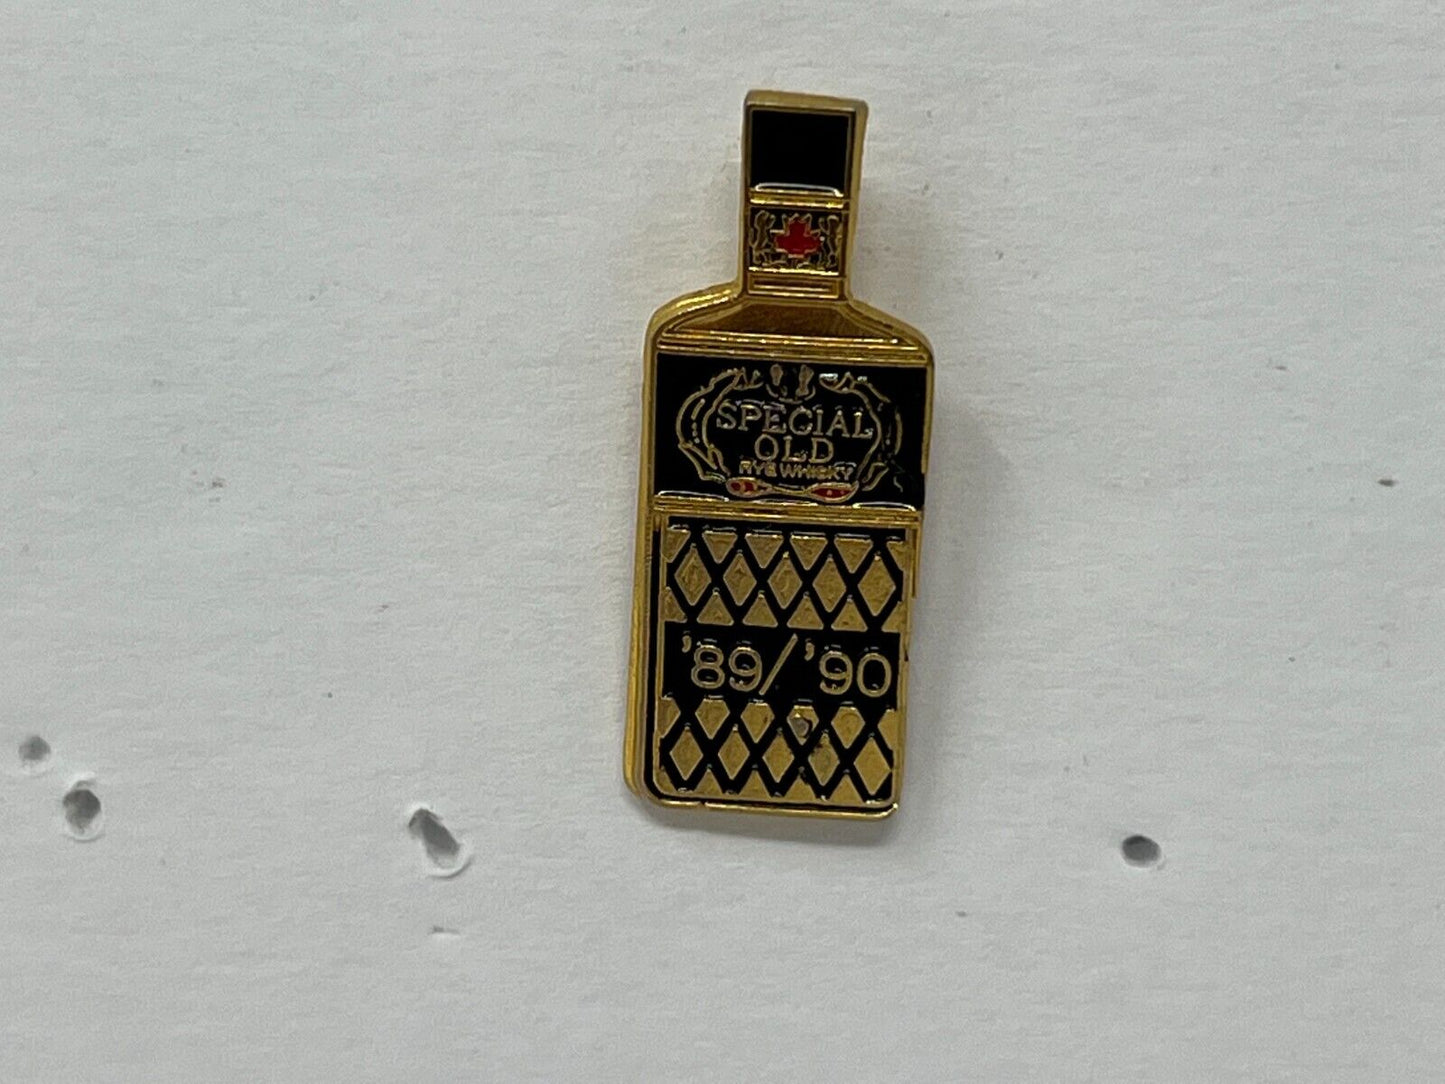 Special Old Rye Whiskey Bottle '89 / '90 Beer & Liquor Lapel Pin